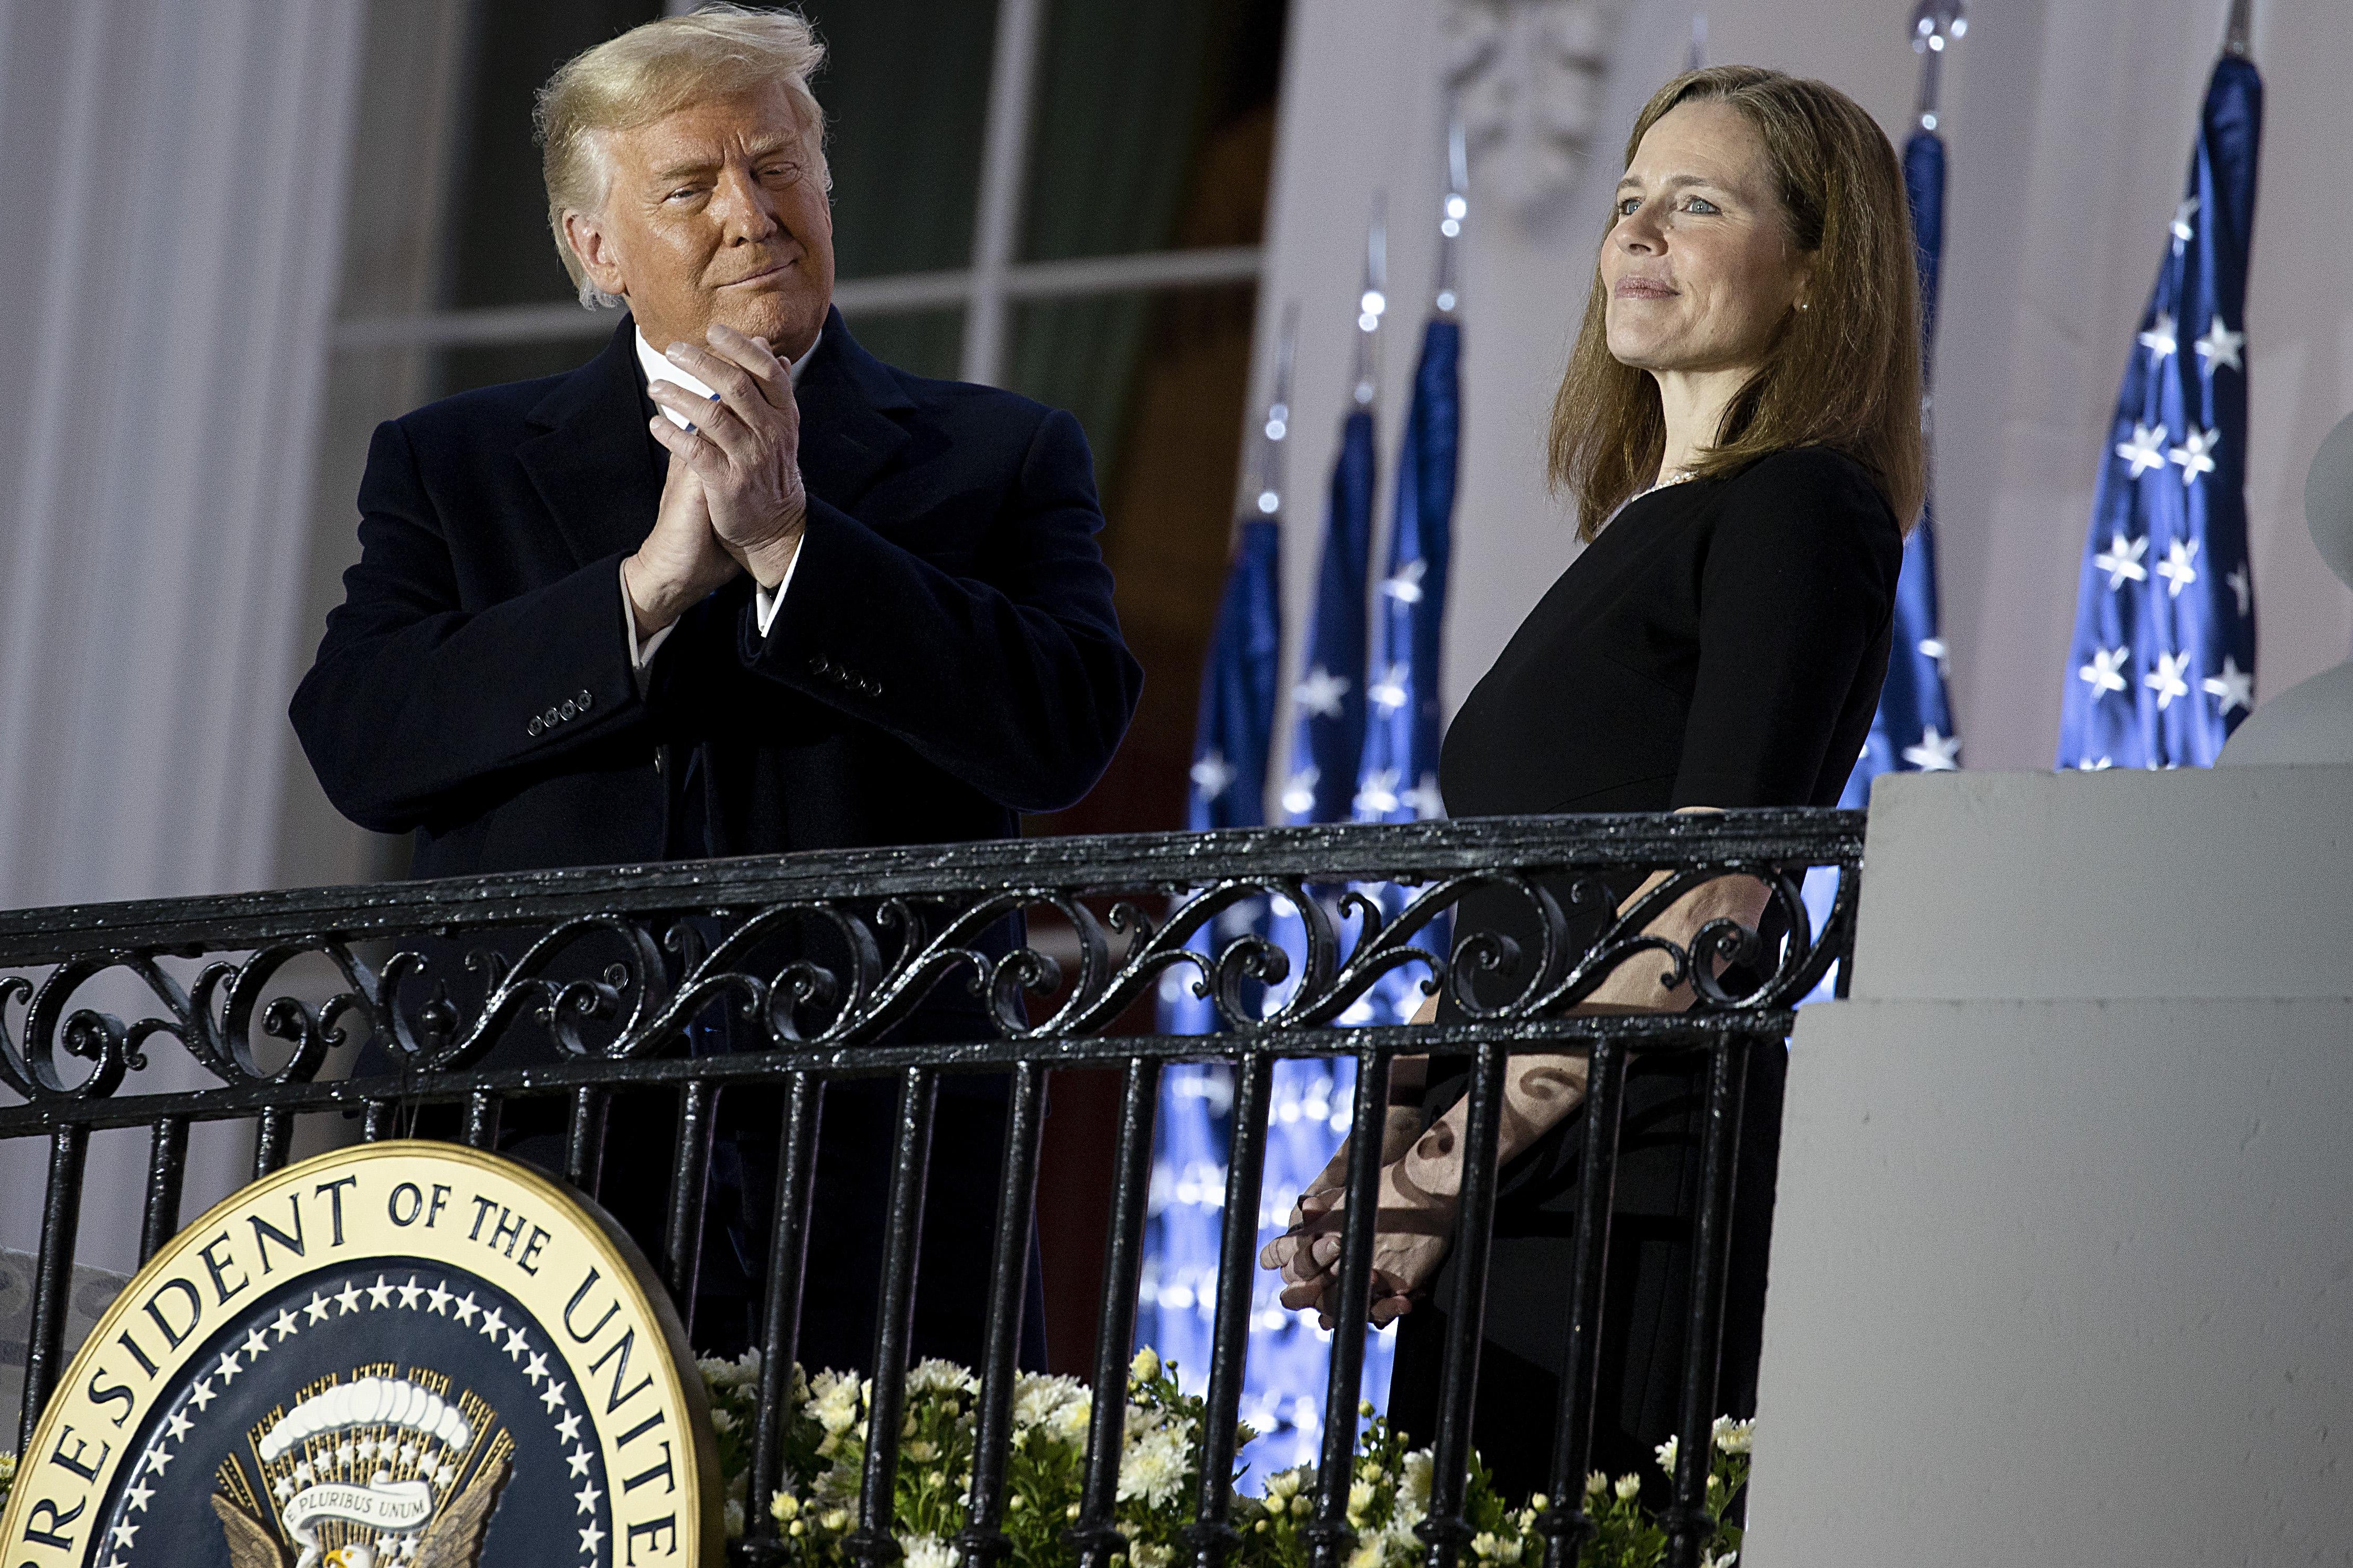 President Donald Trump stands with newly sworn in Supreme Court Associate Justice Amy Coney Barrett during a ceremonial swearing-in event on the South Lawn of the White House October 26, 2020 in Washington, D.C.